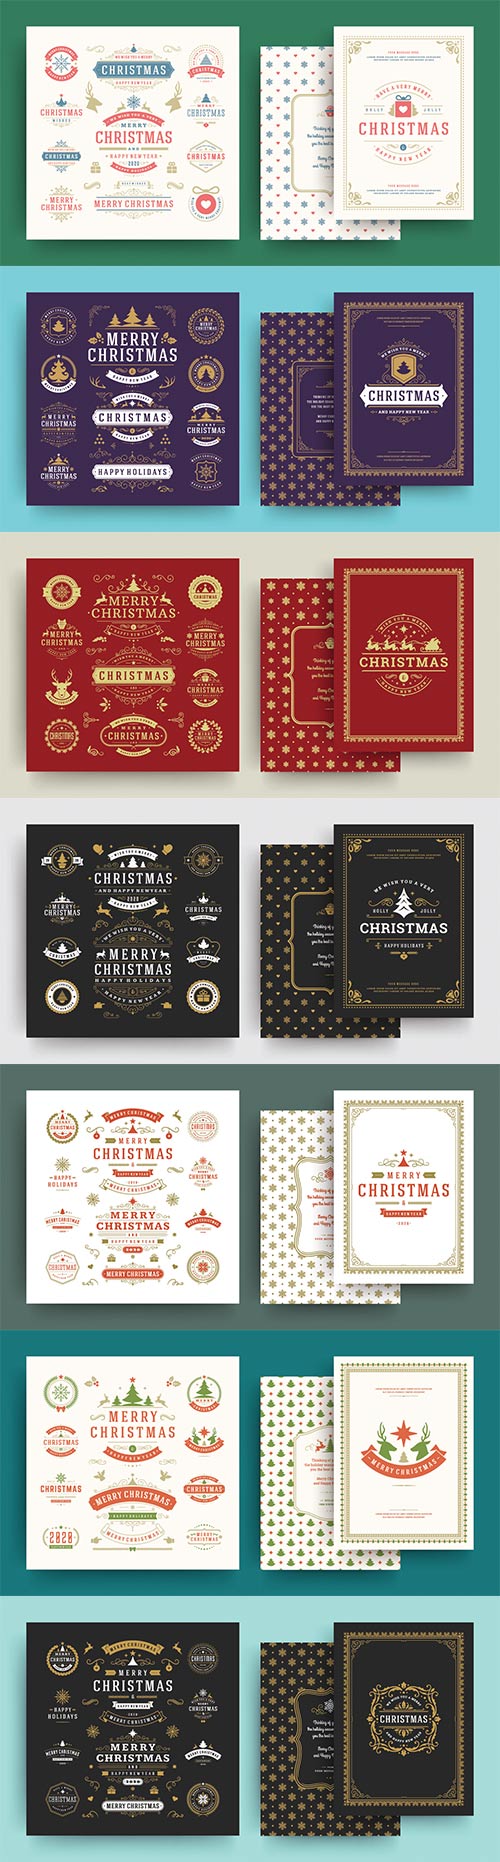 Christmas labels and badges vector design elements set with